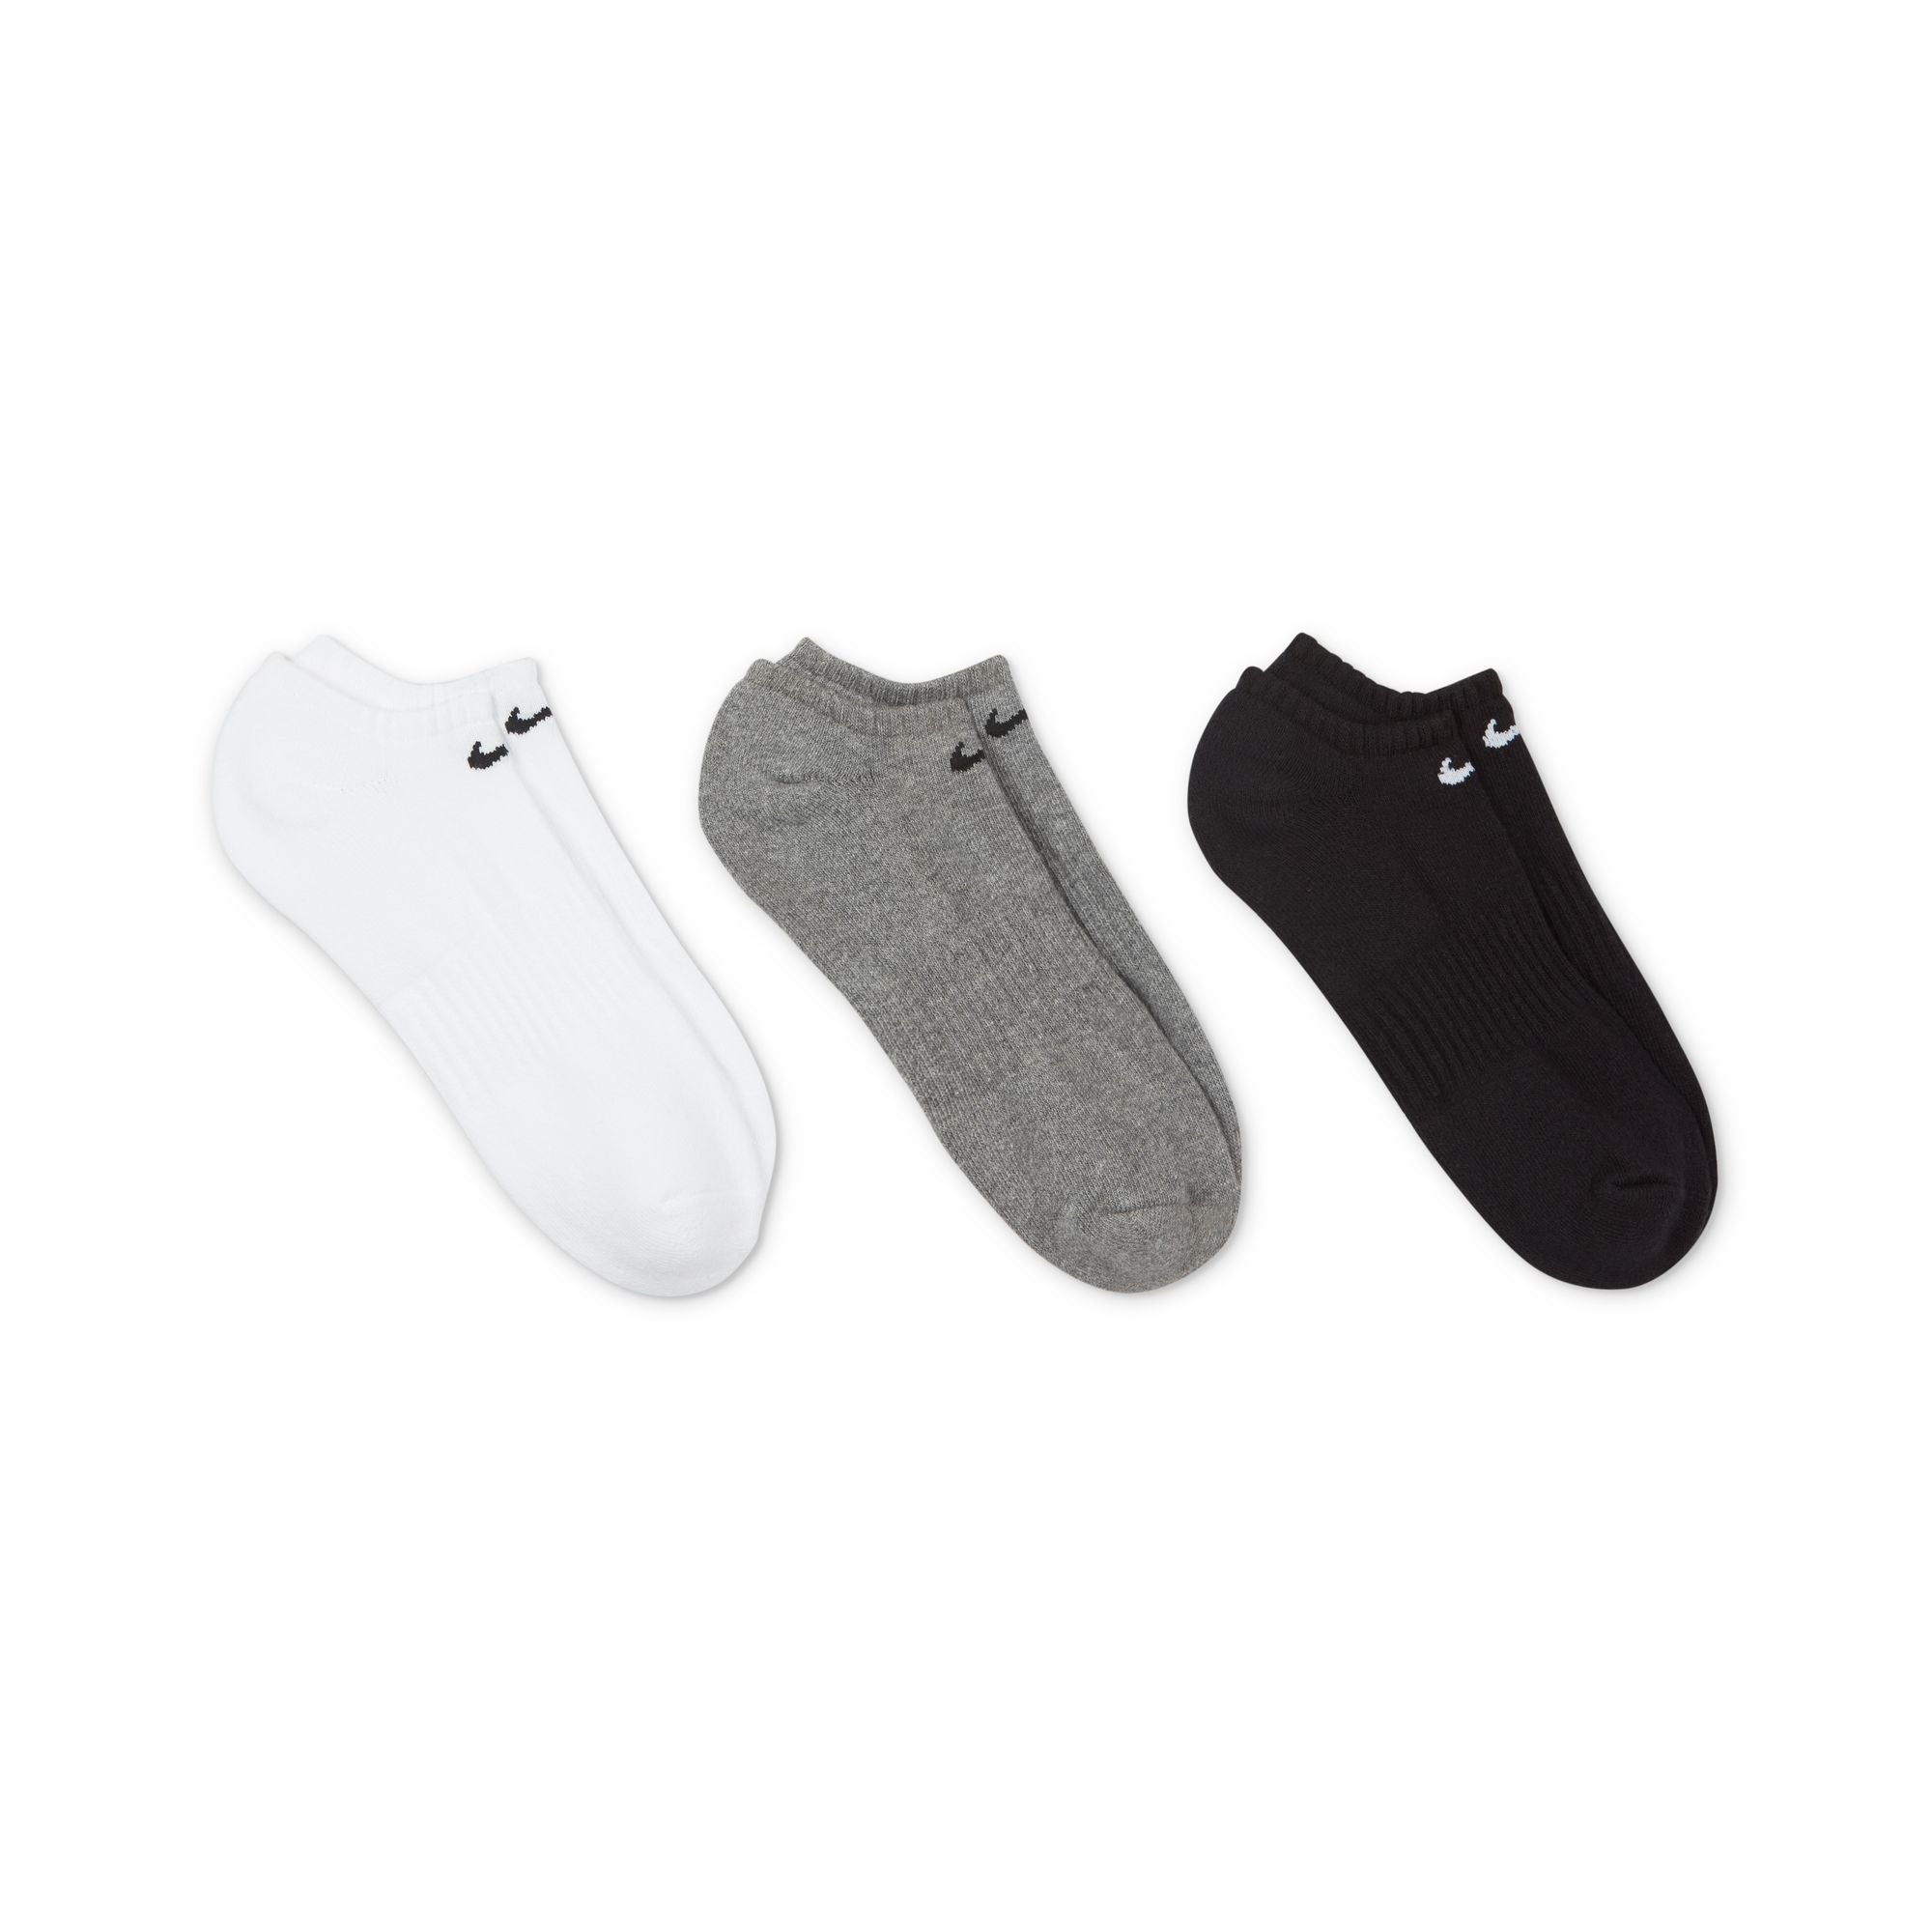 Nike Everyday Cushioned No Show 3 Pack Socks - Assorted Colours